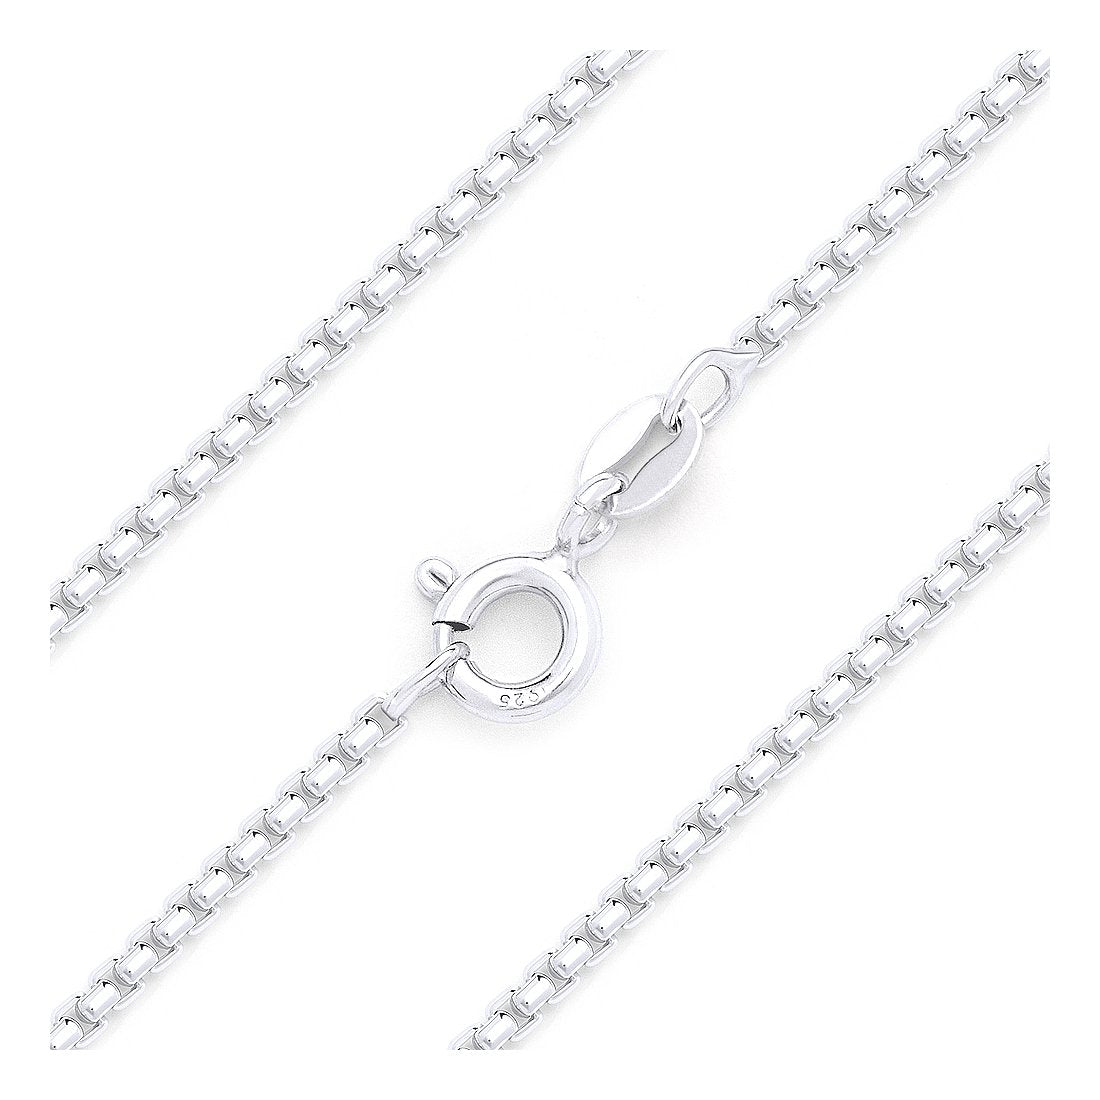 16-inch 012 Sterling Silver Box Chain Necklace